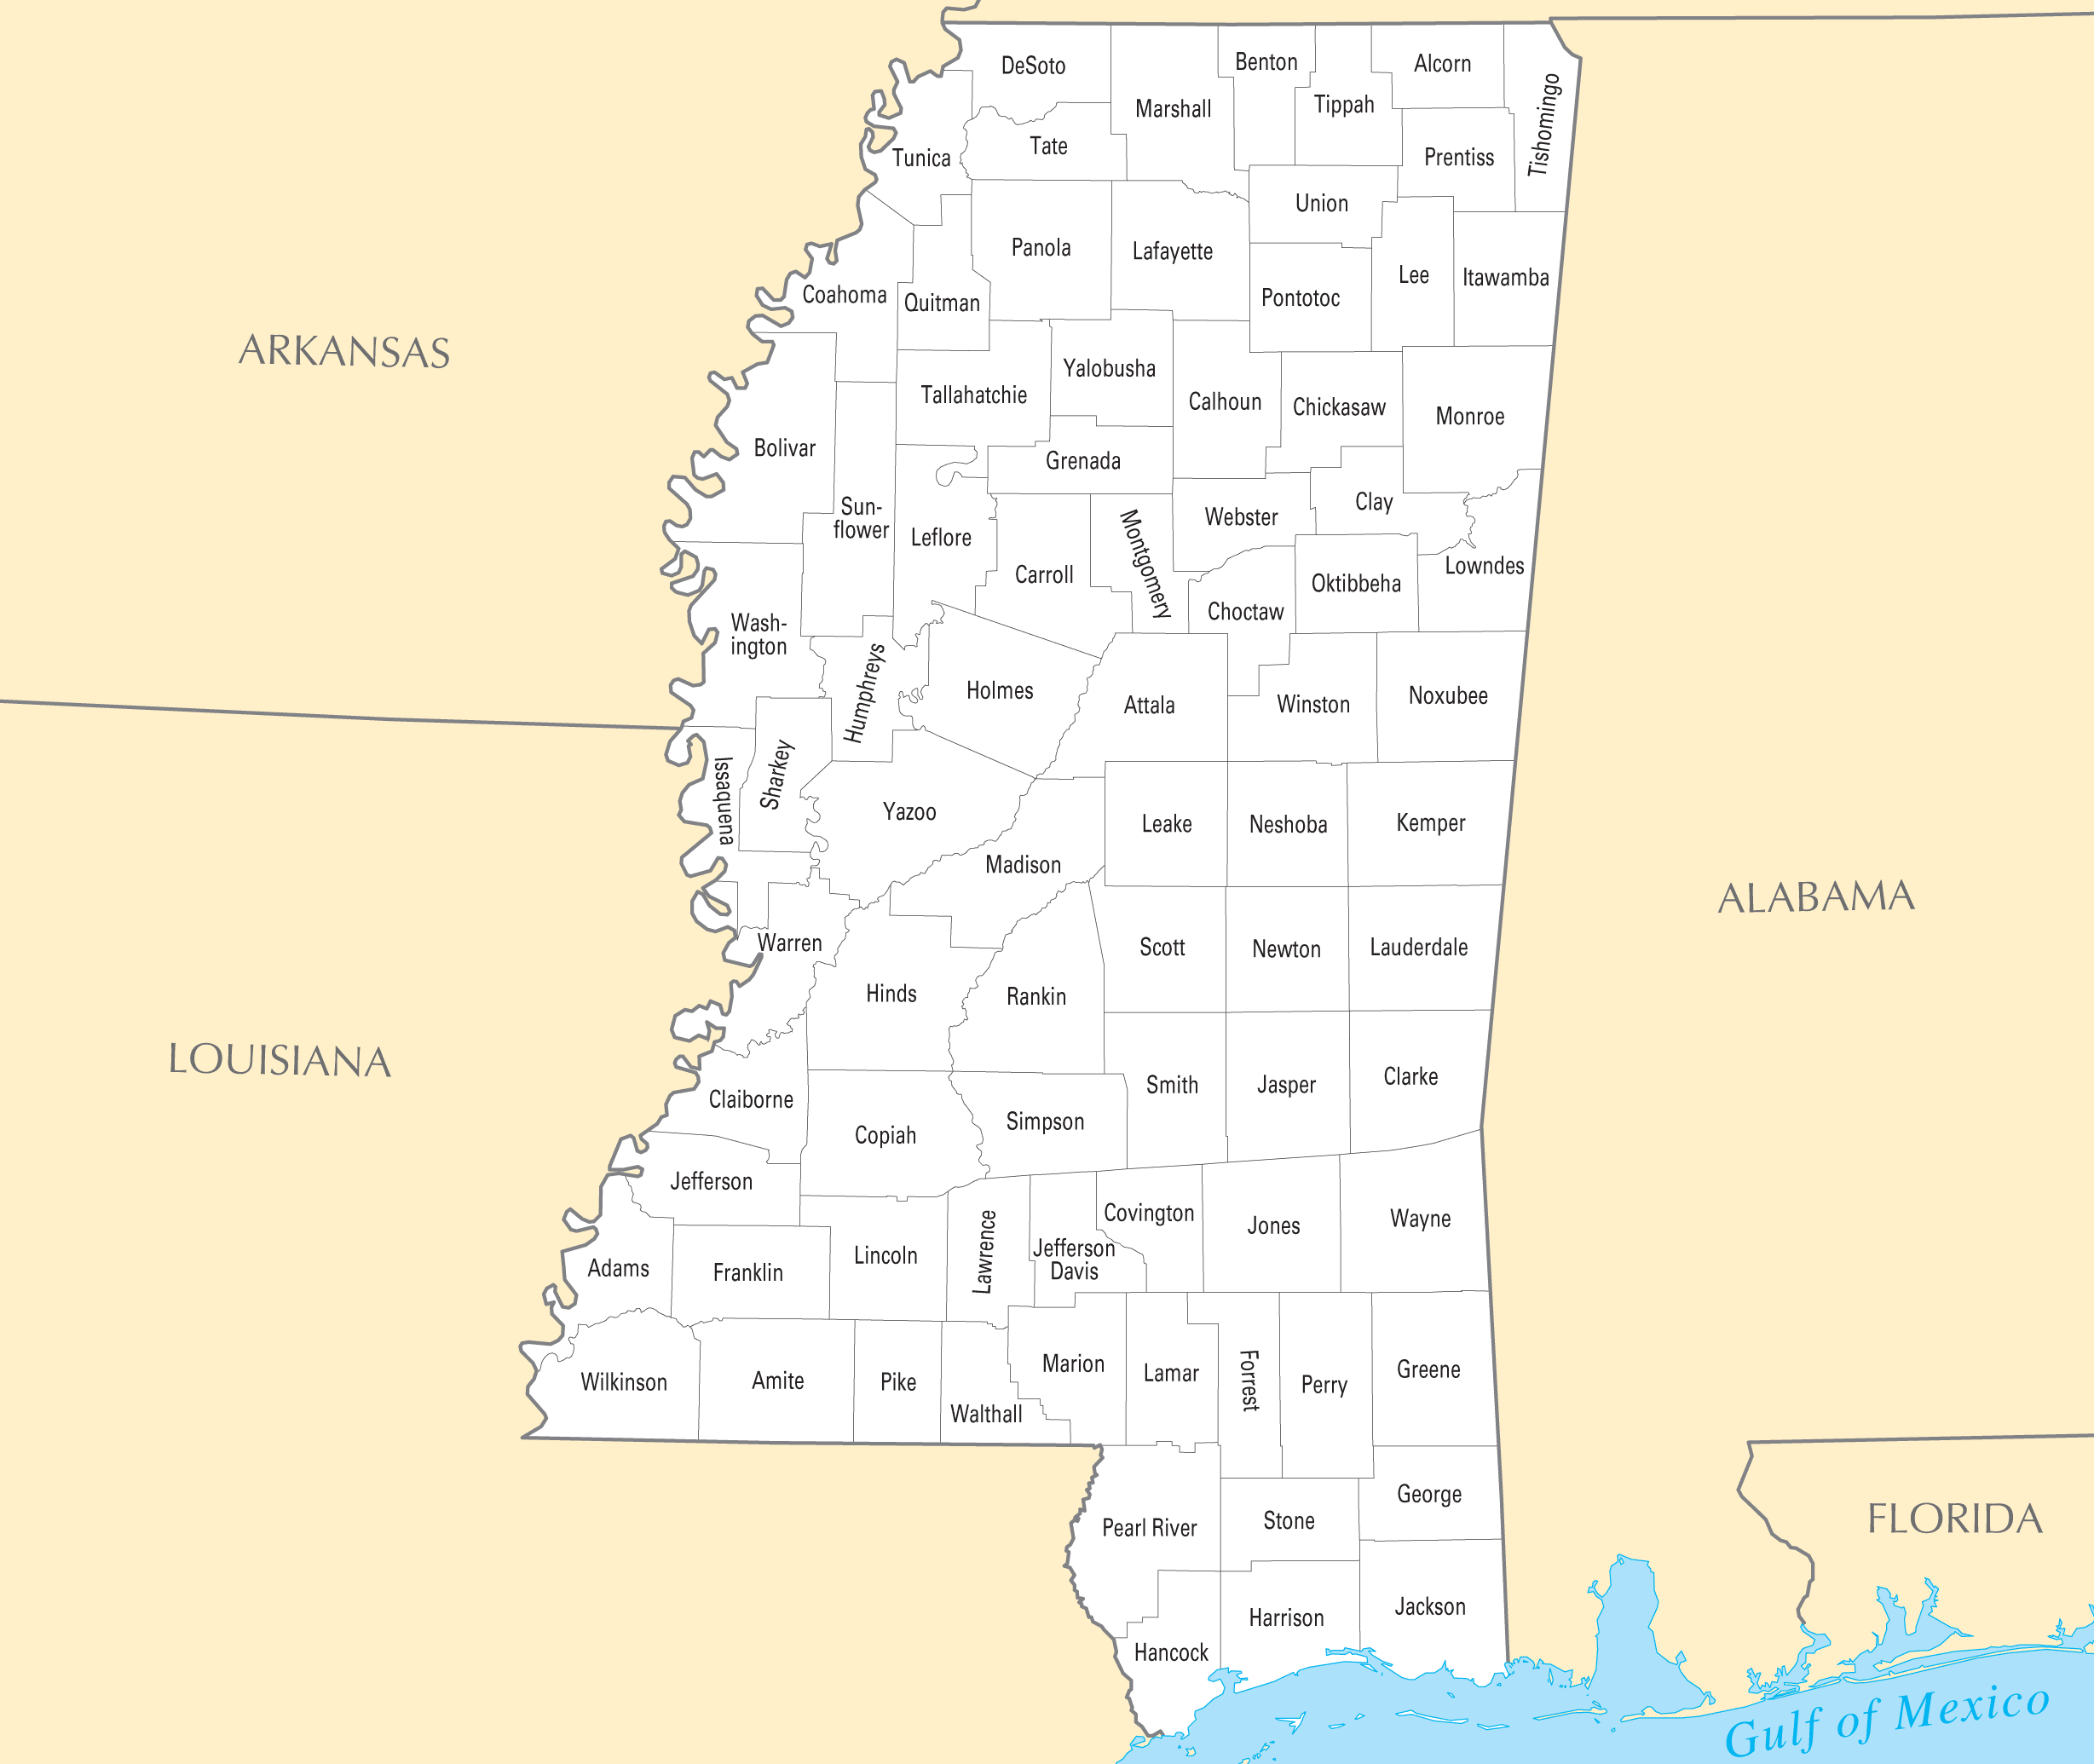 Mississippi counties